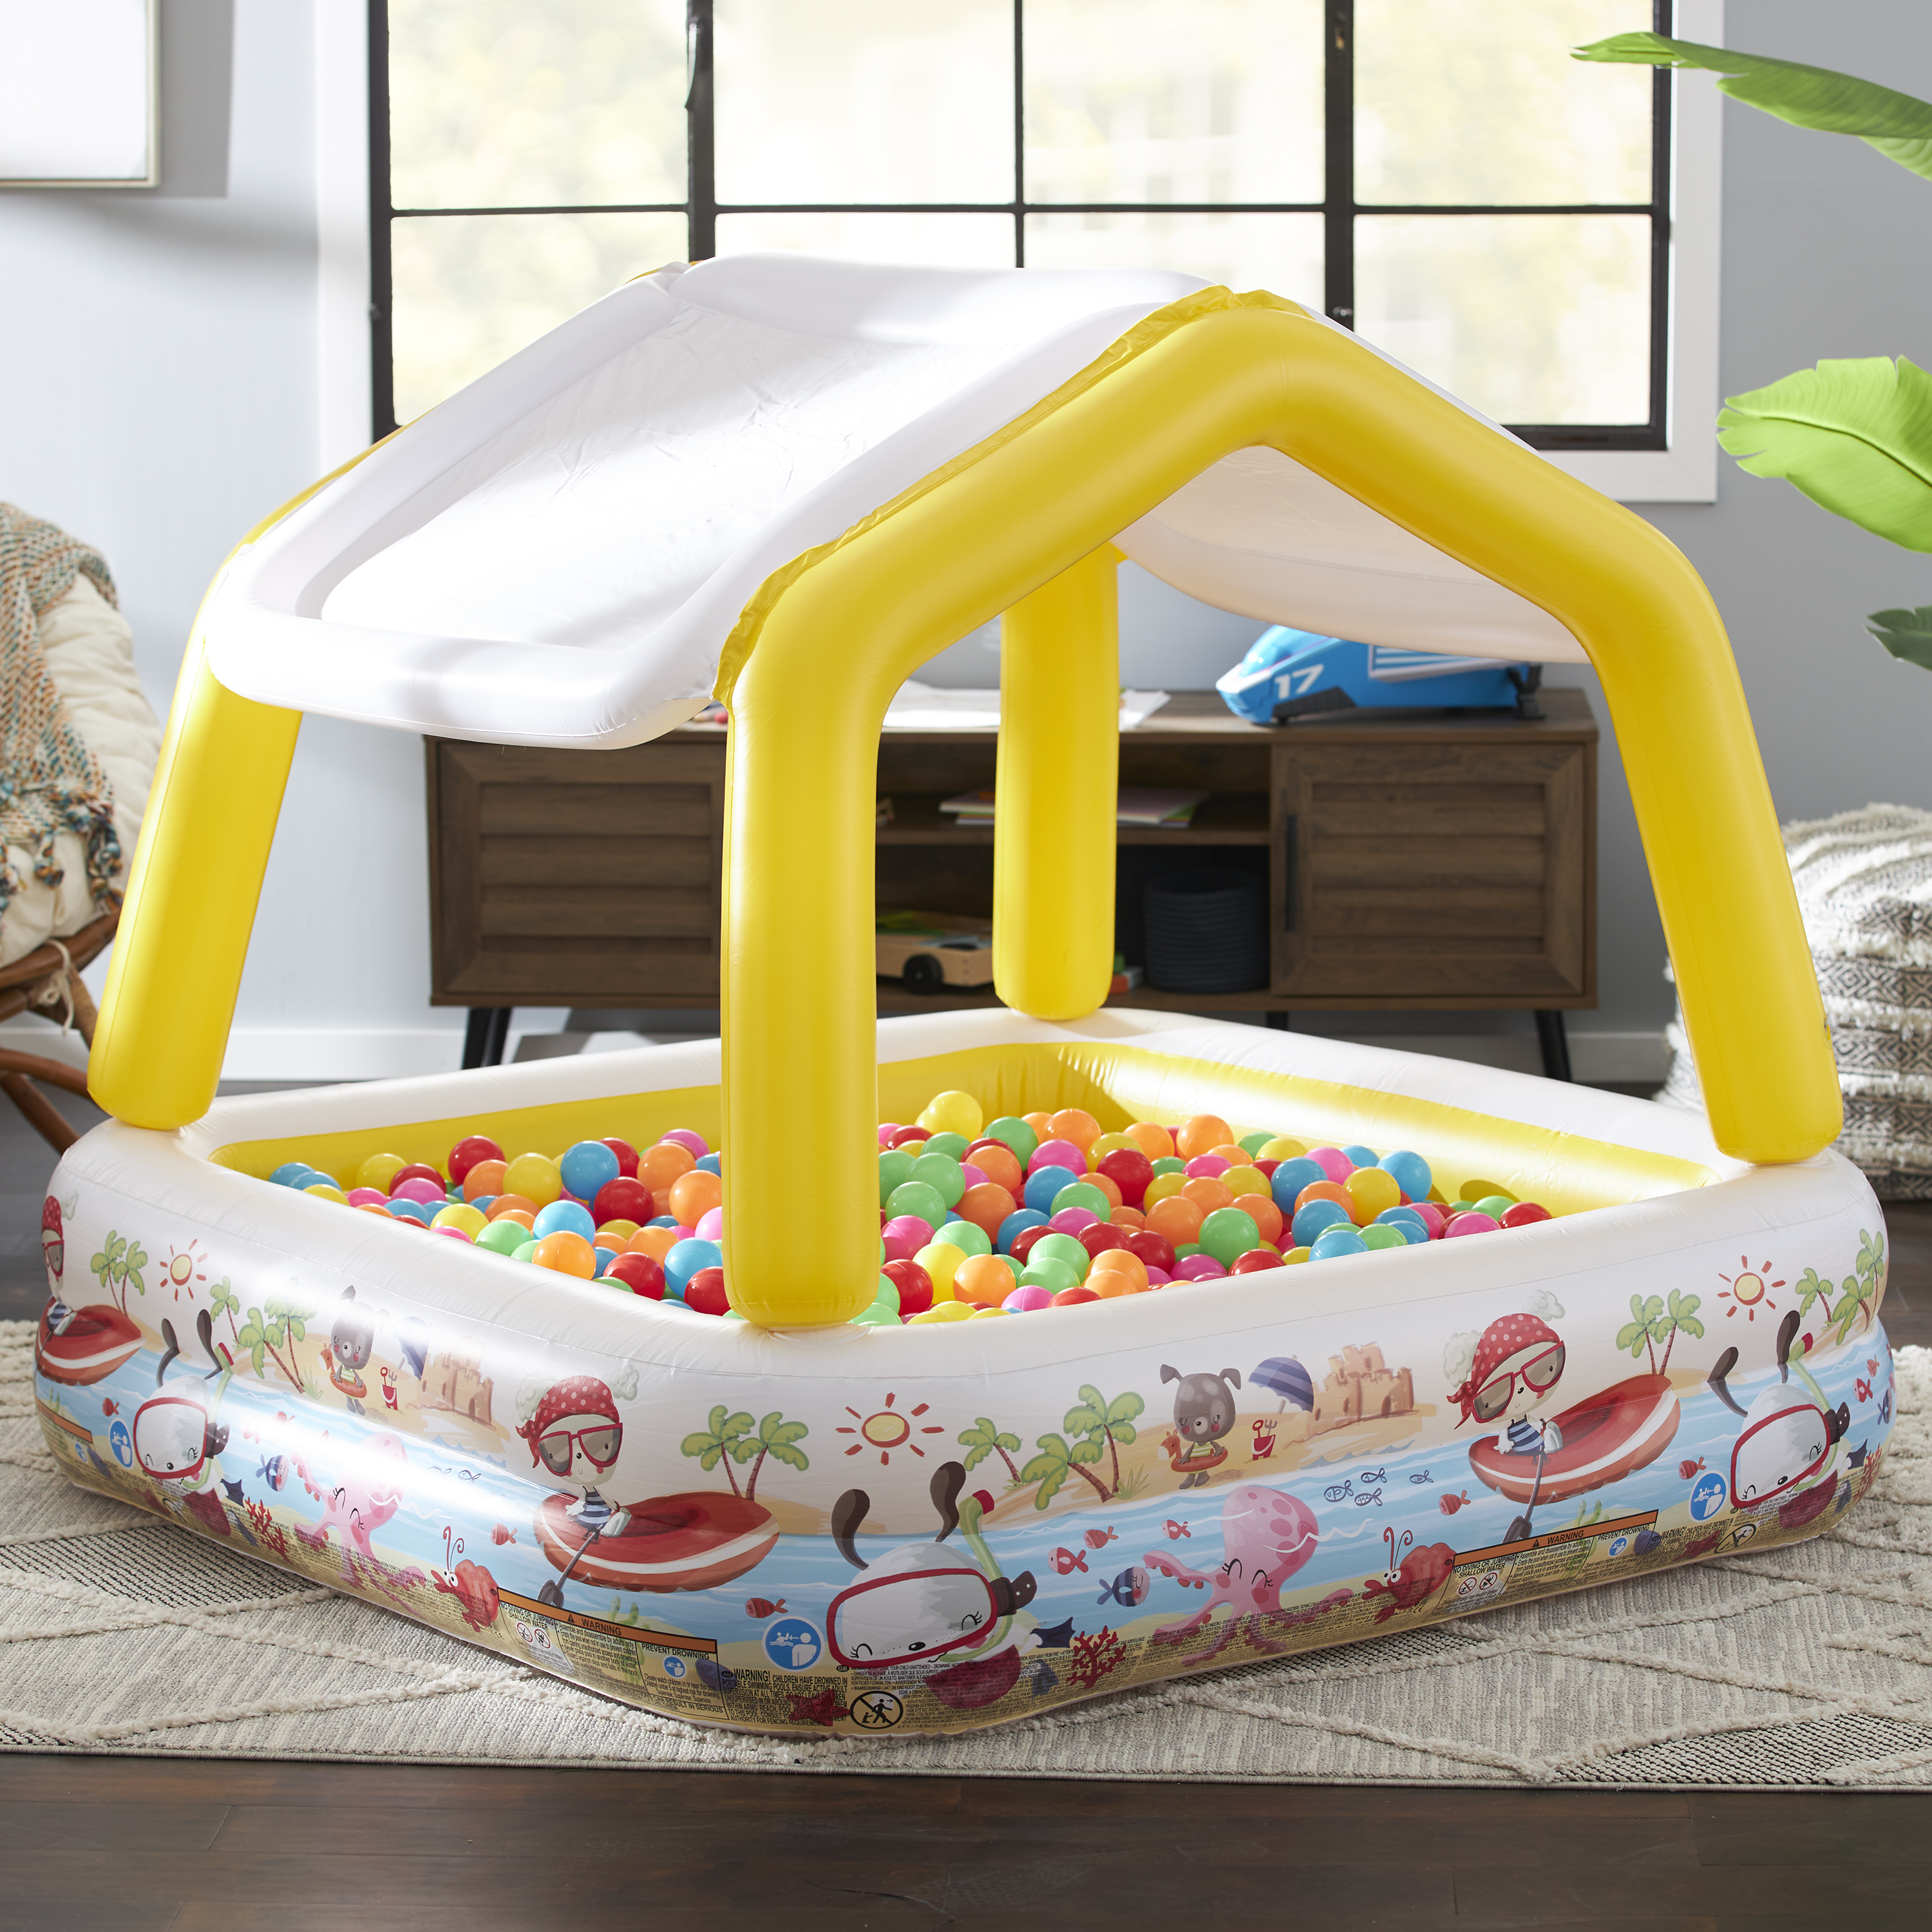 Intex 5ft x 48in Inflatable Ocean Scene Sun Shade Kids Pool With Canopy - image 2 of 12